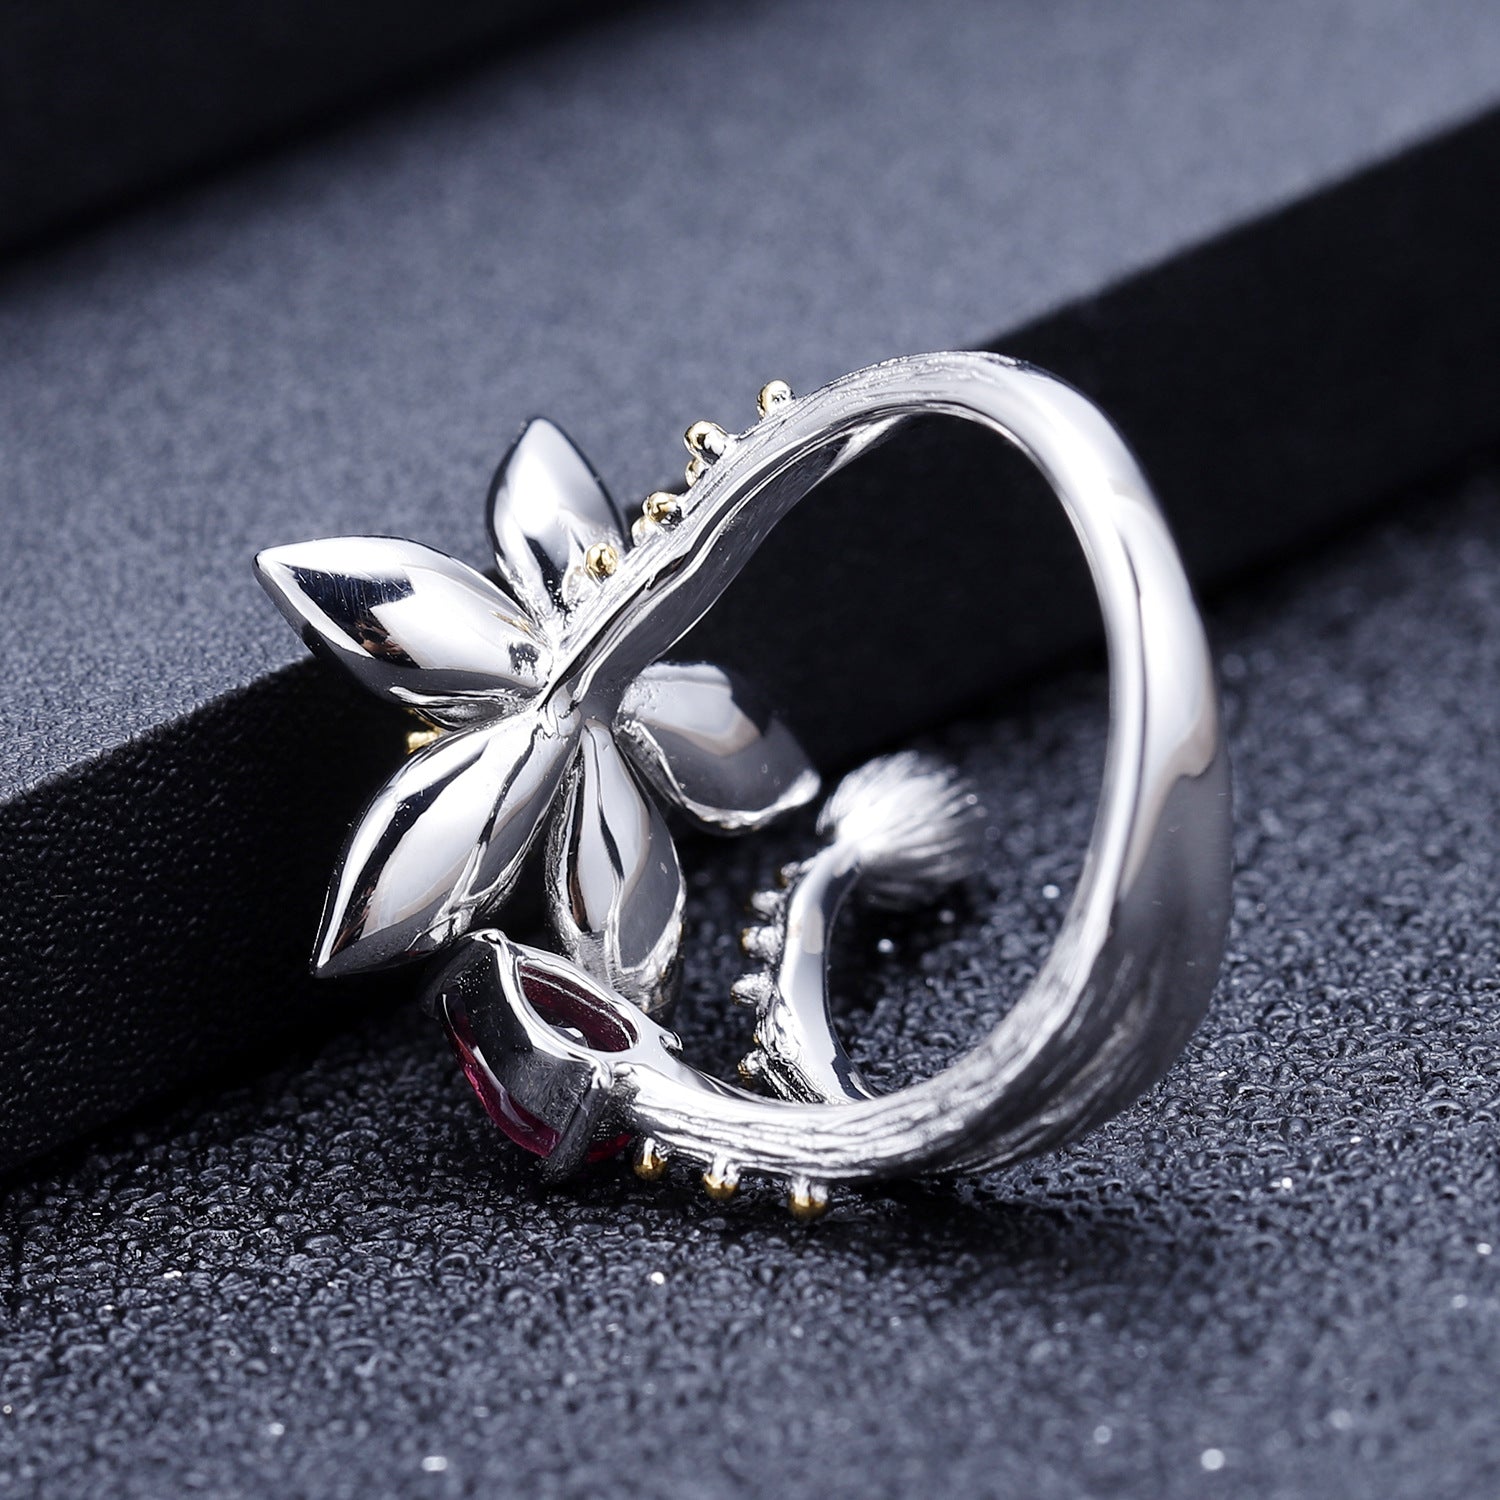 Floral Design with Natural Gem S925 Silver Ring for Women